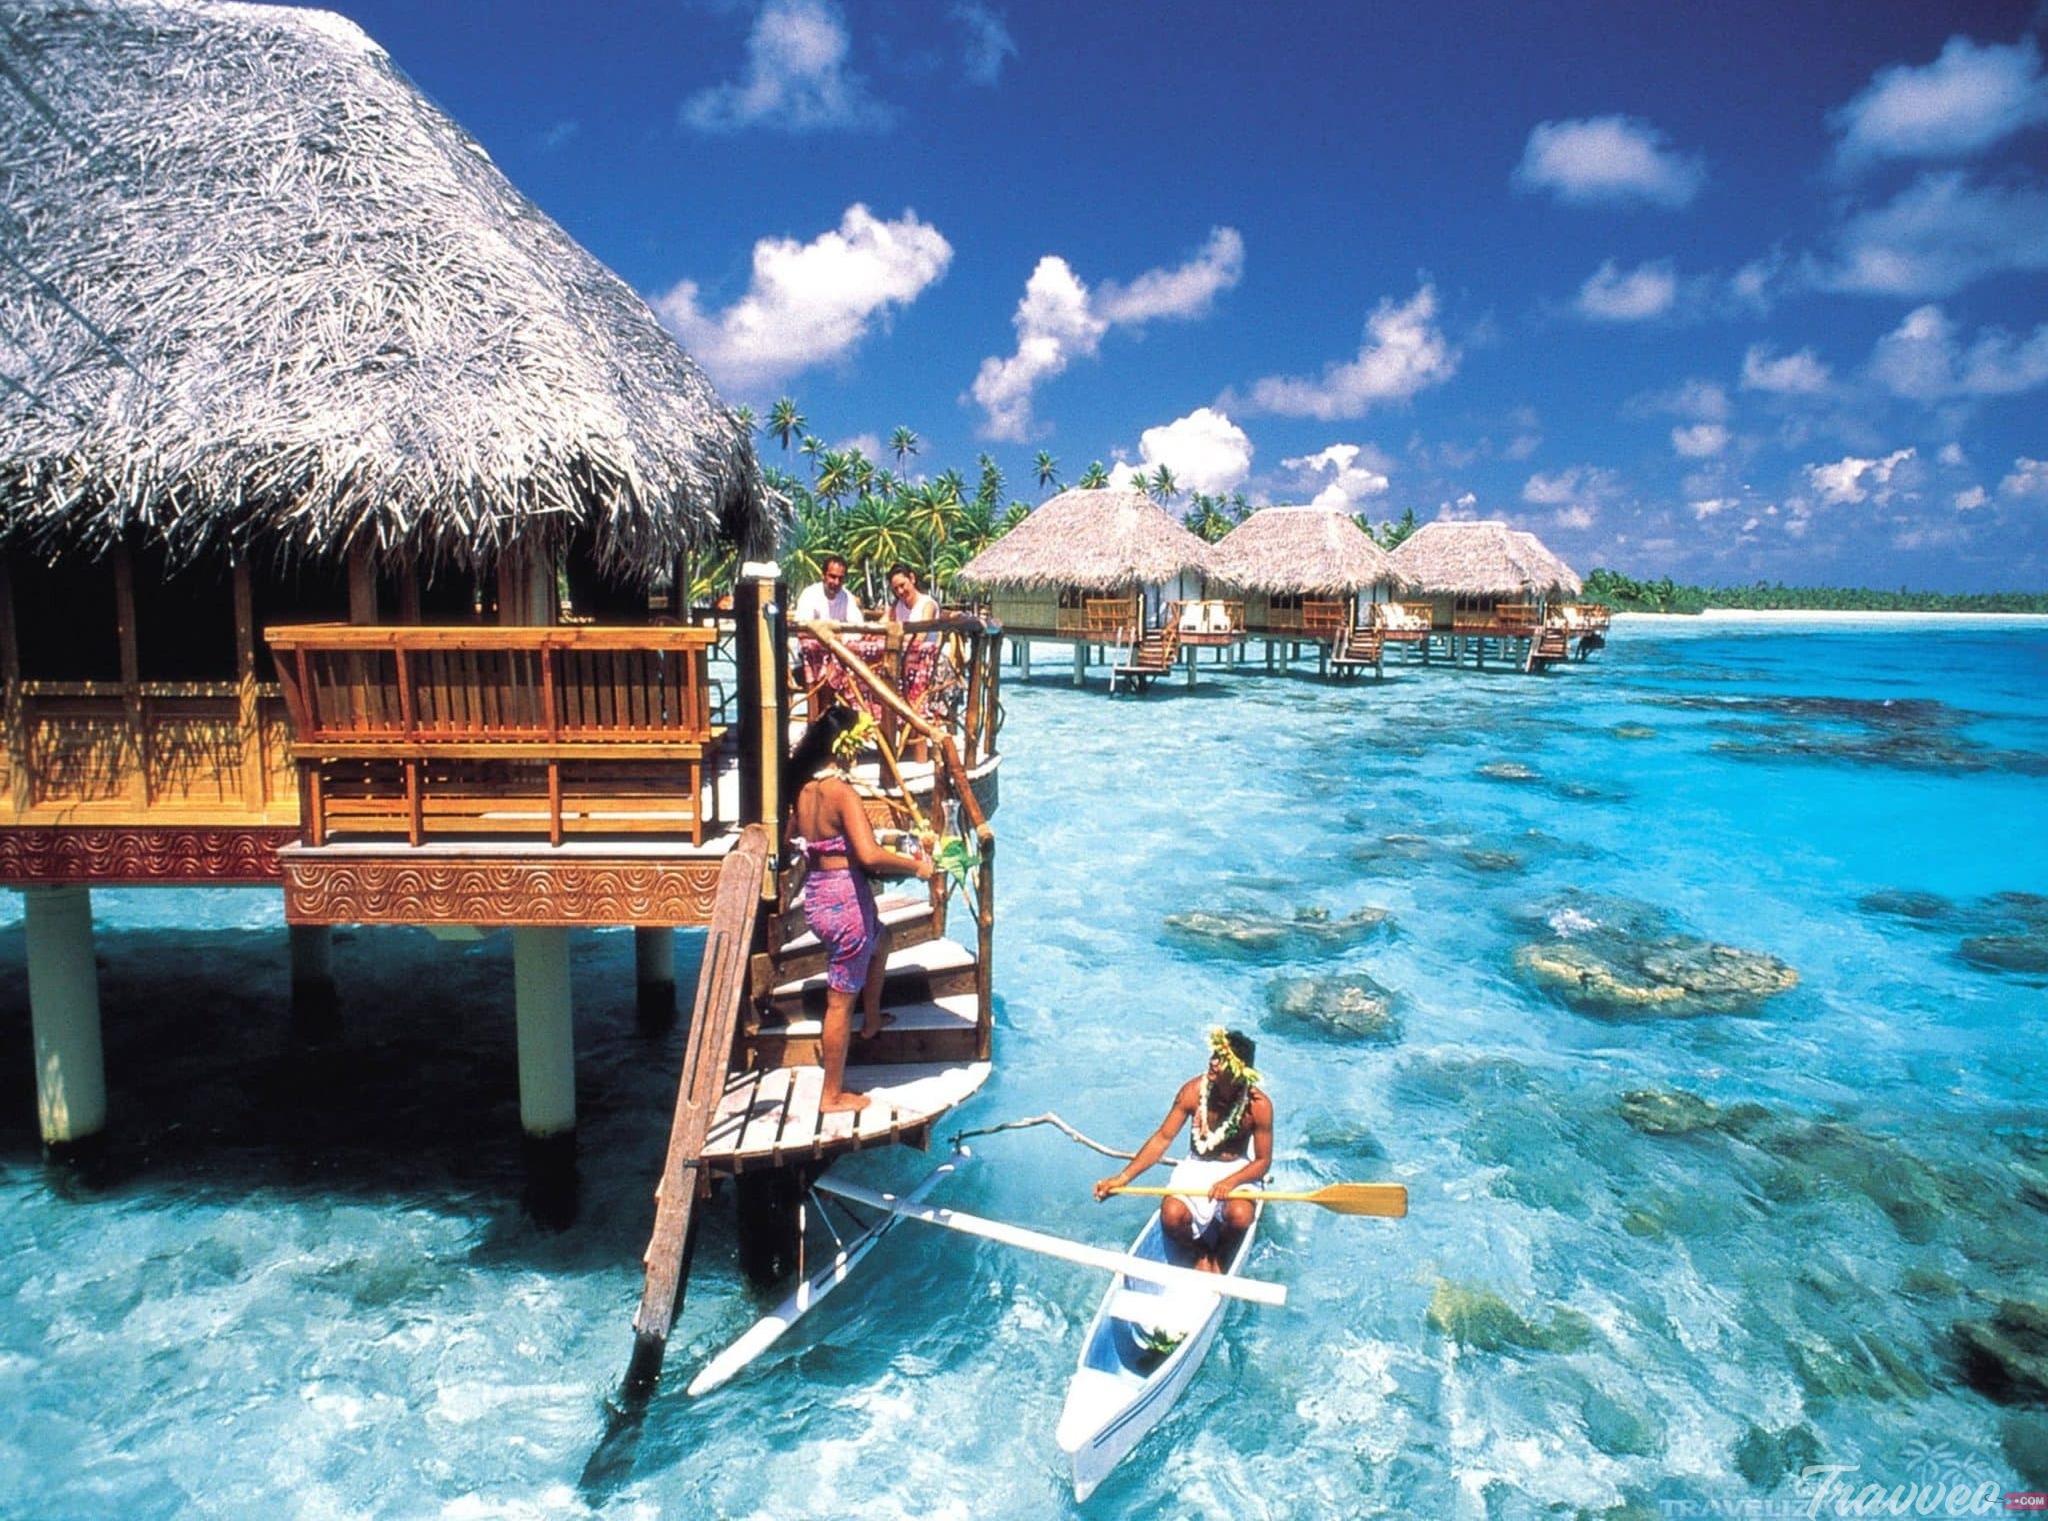 Tourist attractions in french Polynesia